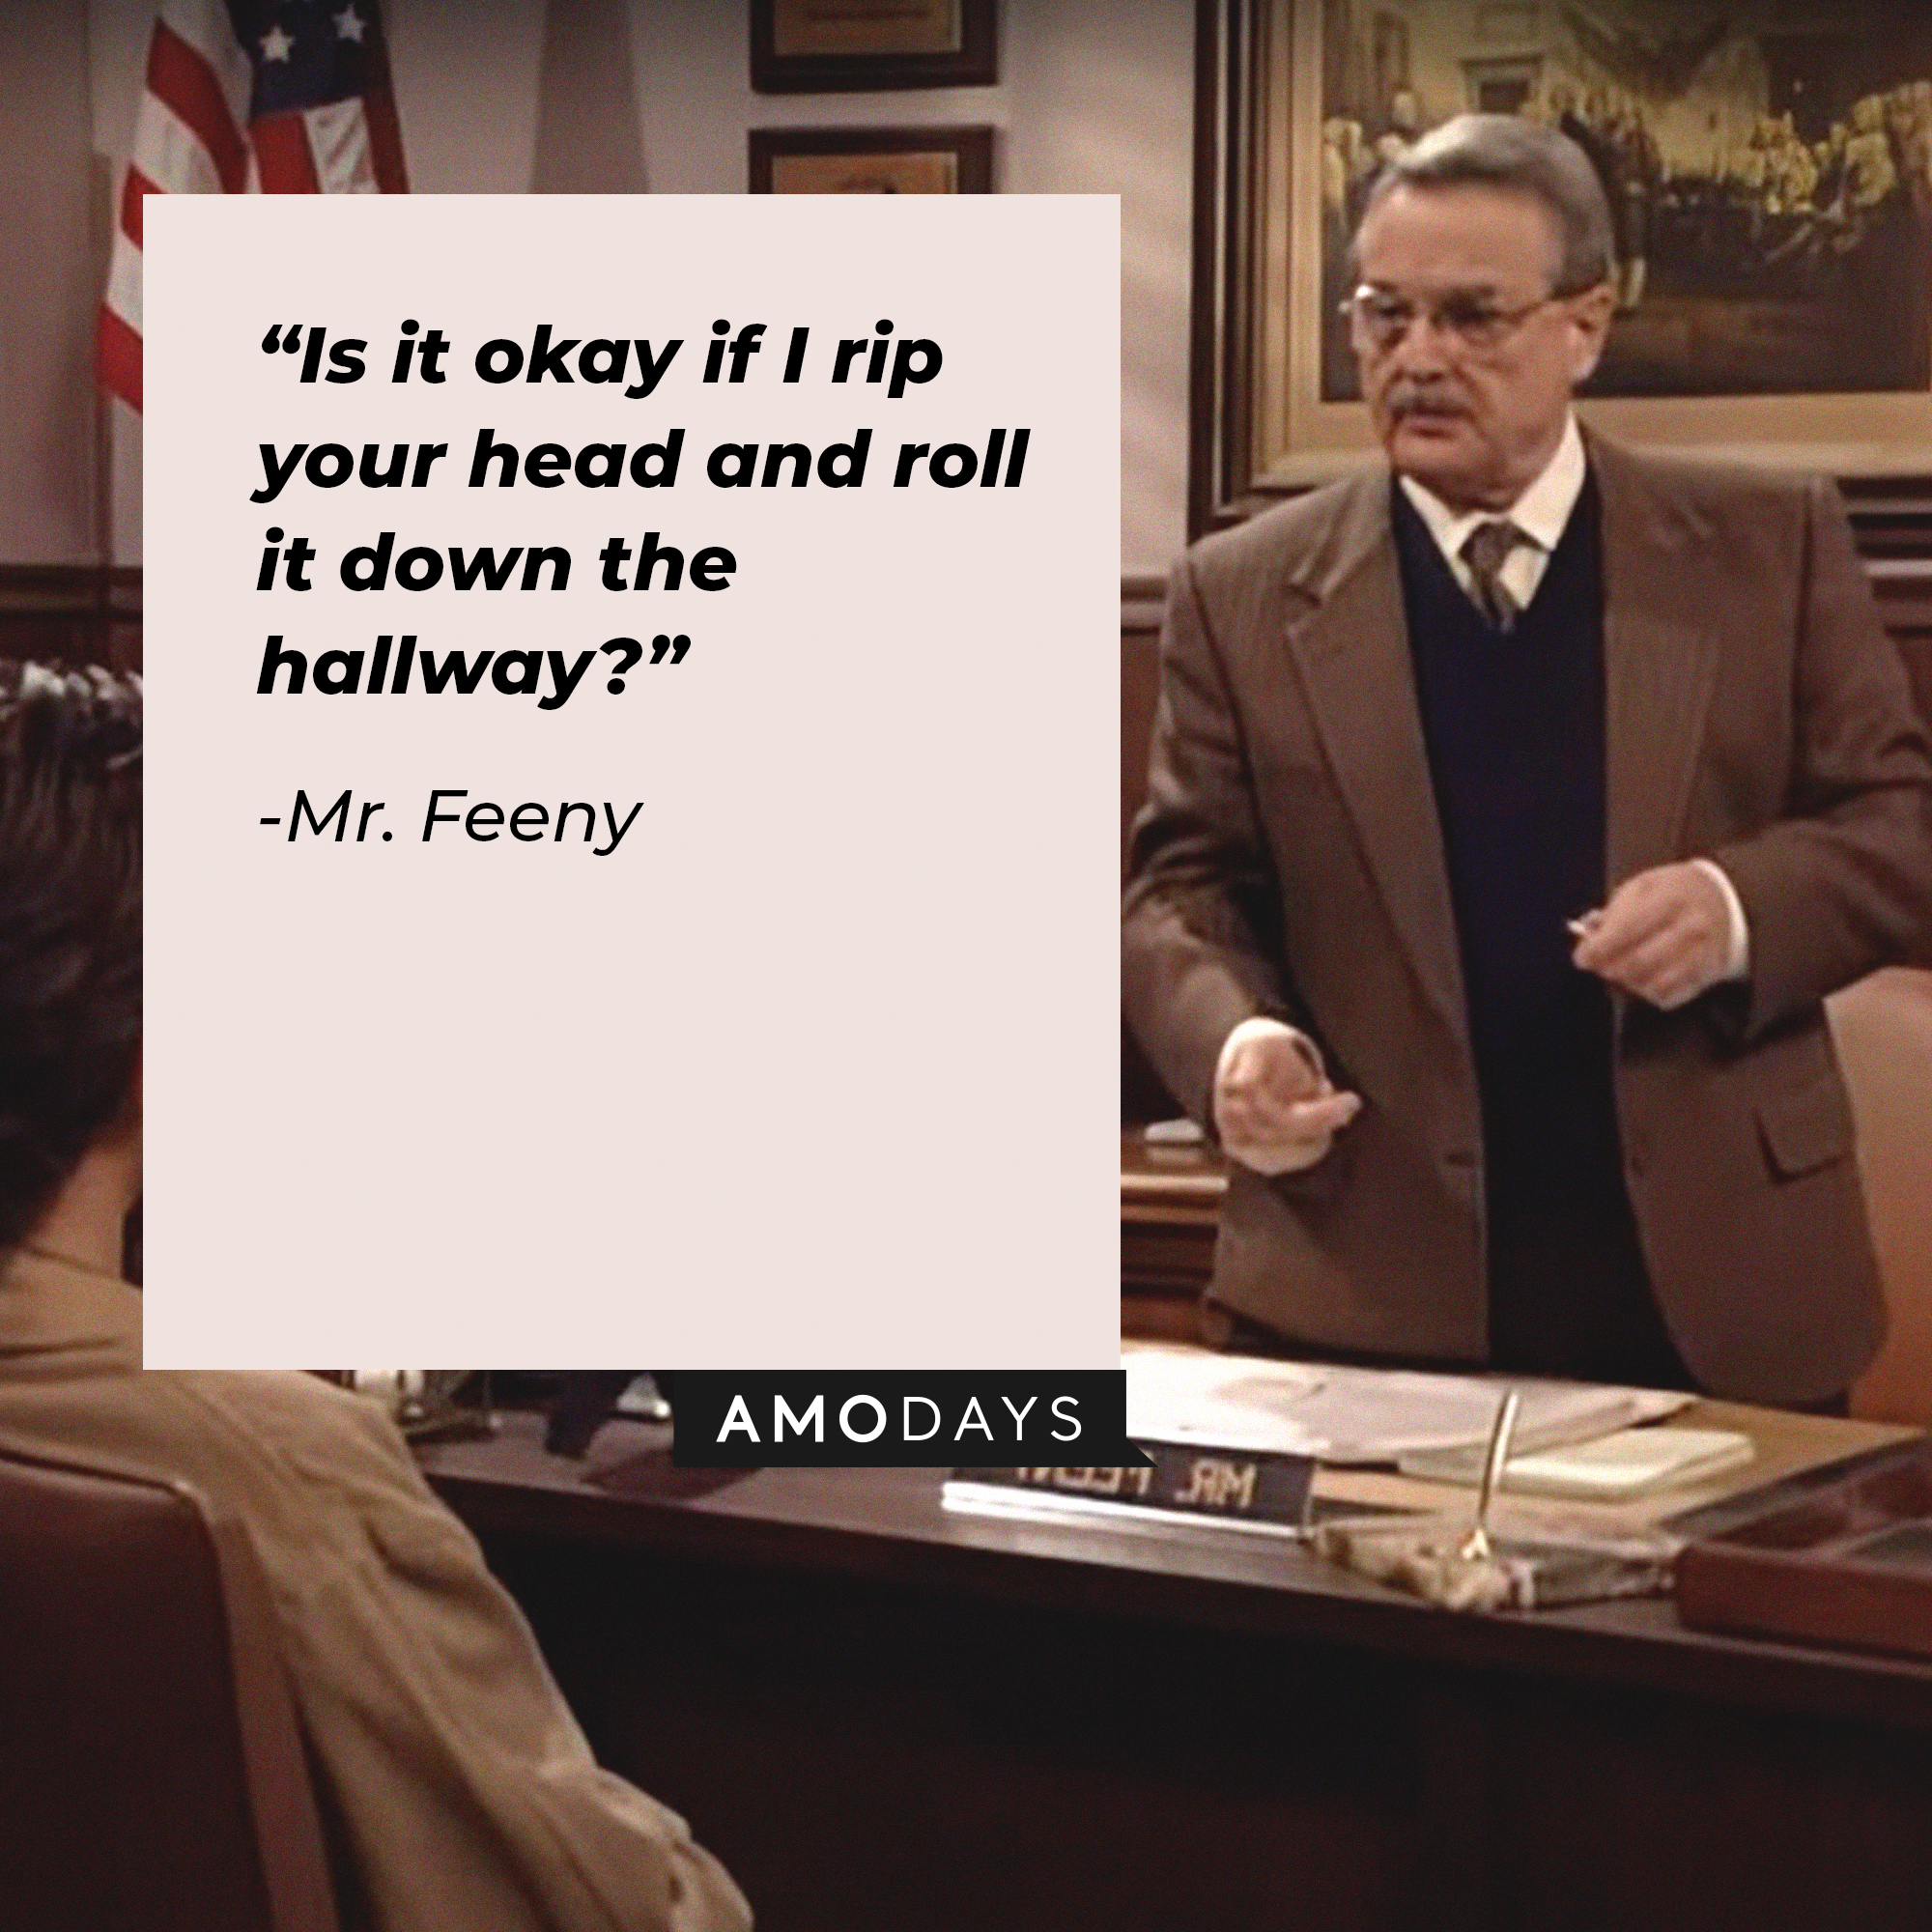 An image of Mr. Feeny with his quote: “Is it okay if I rip your head and roll it down the hallway?” | Source: facebook.com/BoyMeetsWorldSeries